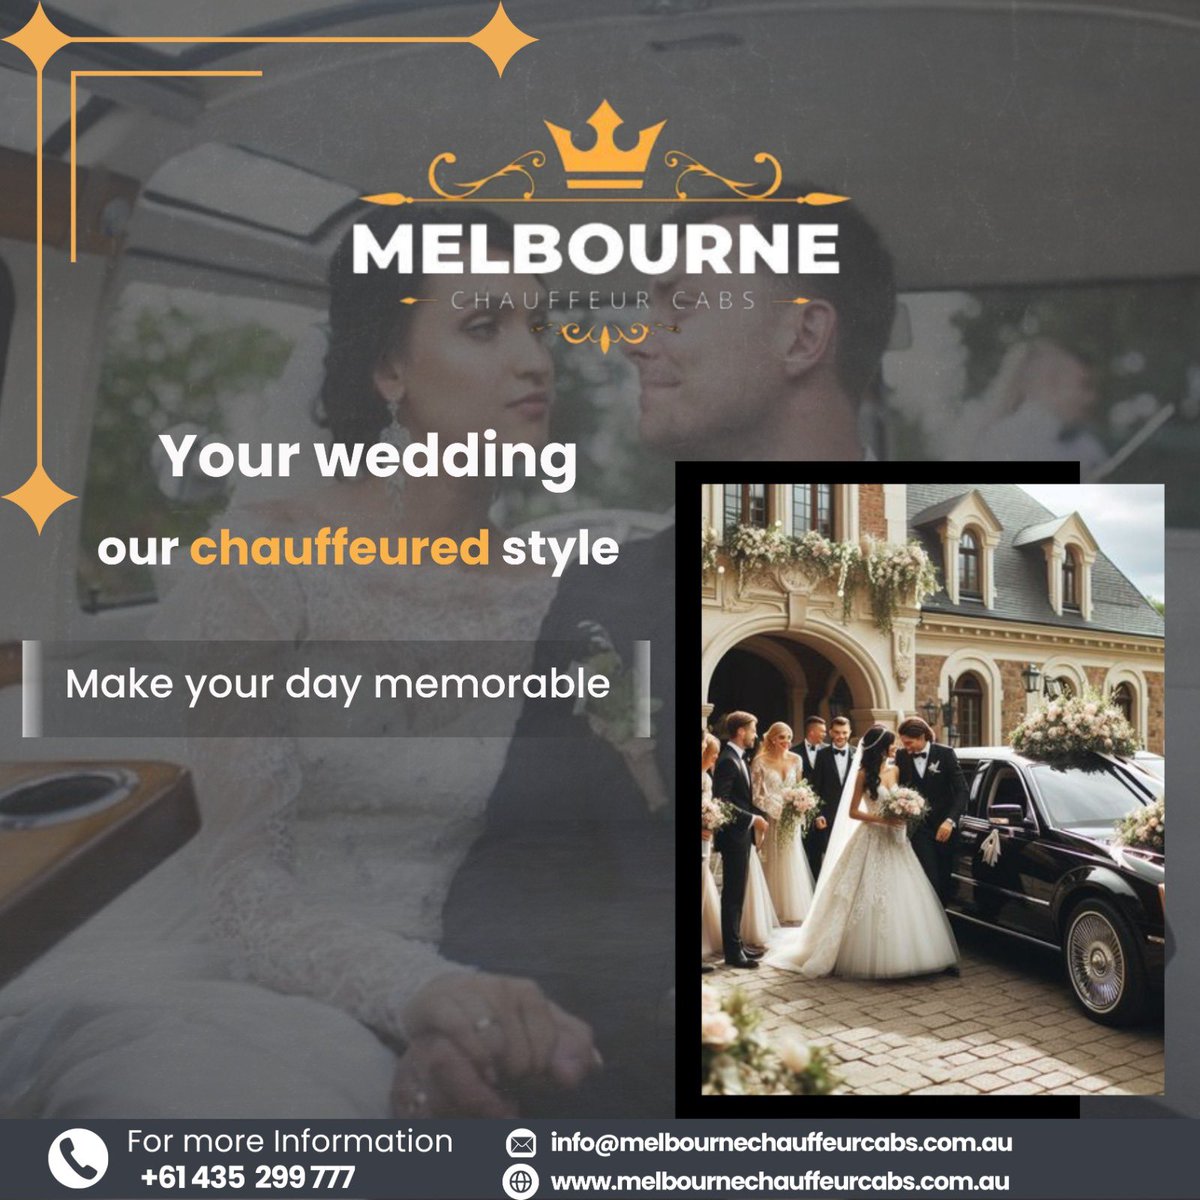 🌟 Your wedding day just got better with Melbourne Chauffeur Cabs premium chauffeur service! 🌟 Let us take care of your transportation needs on this special day. Sit back, relax, and arrive in style with our professional chauffeurs. 📞 Call us at: +61 435 299 777 🌐 Visit